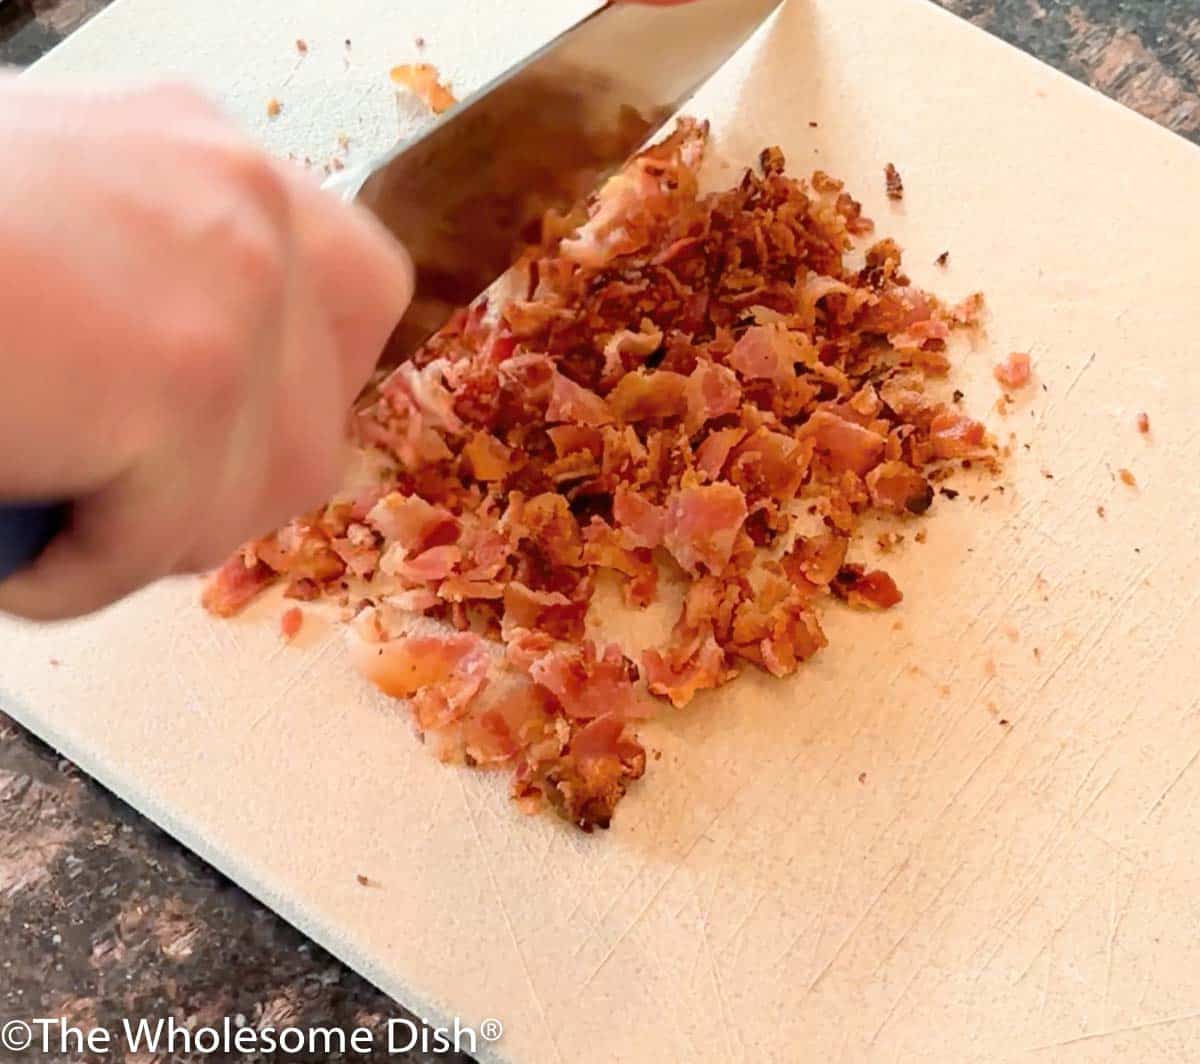 Chopping cooked bacon on a cutting board.